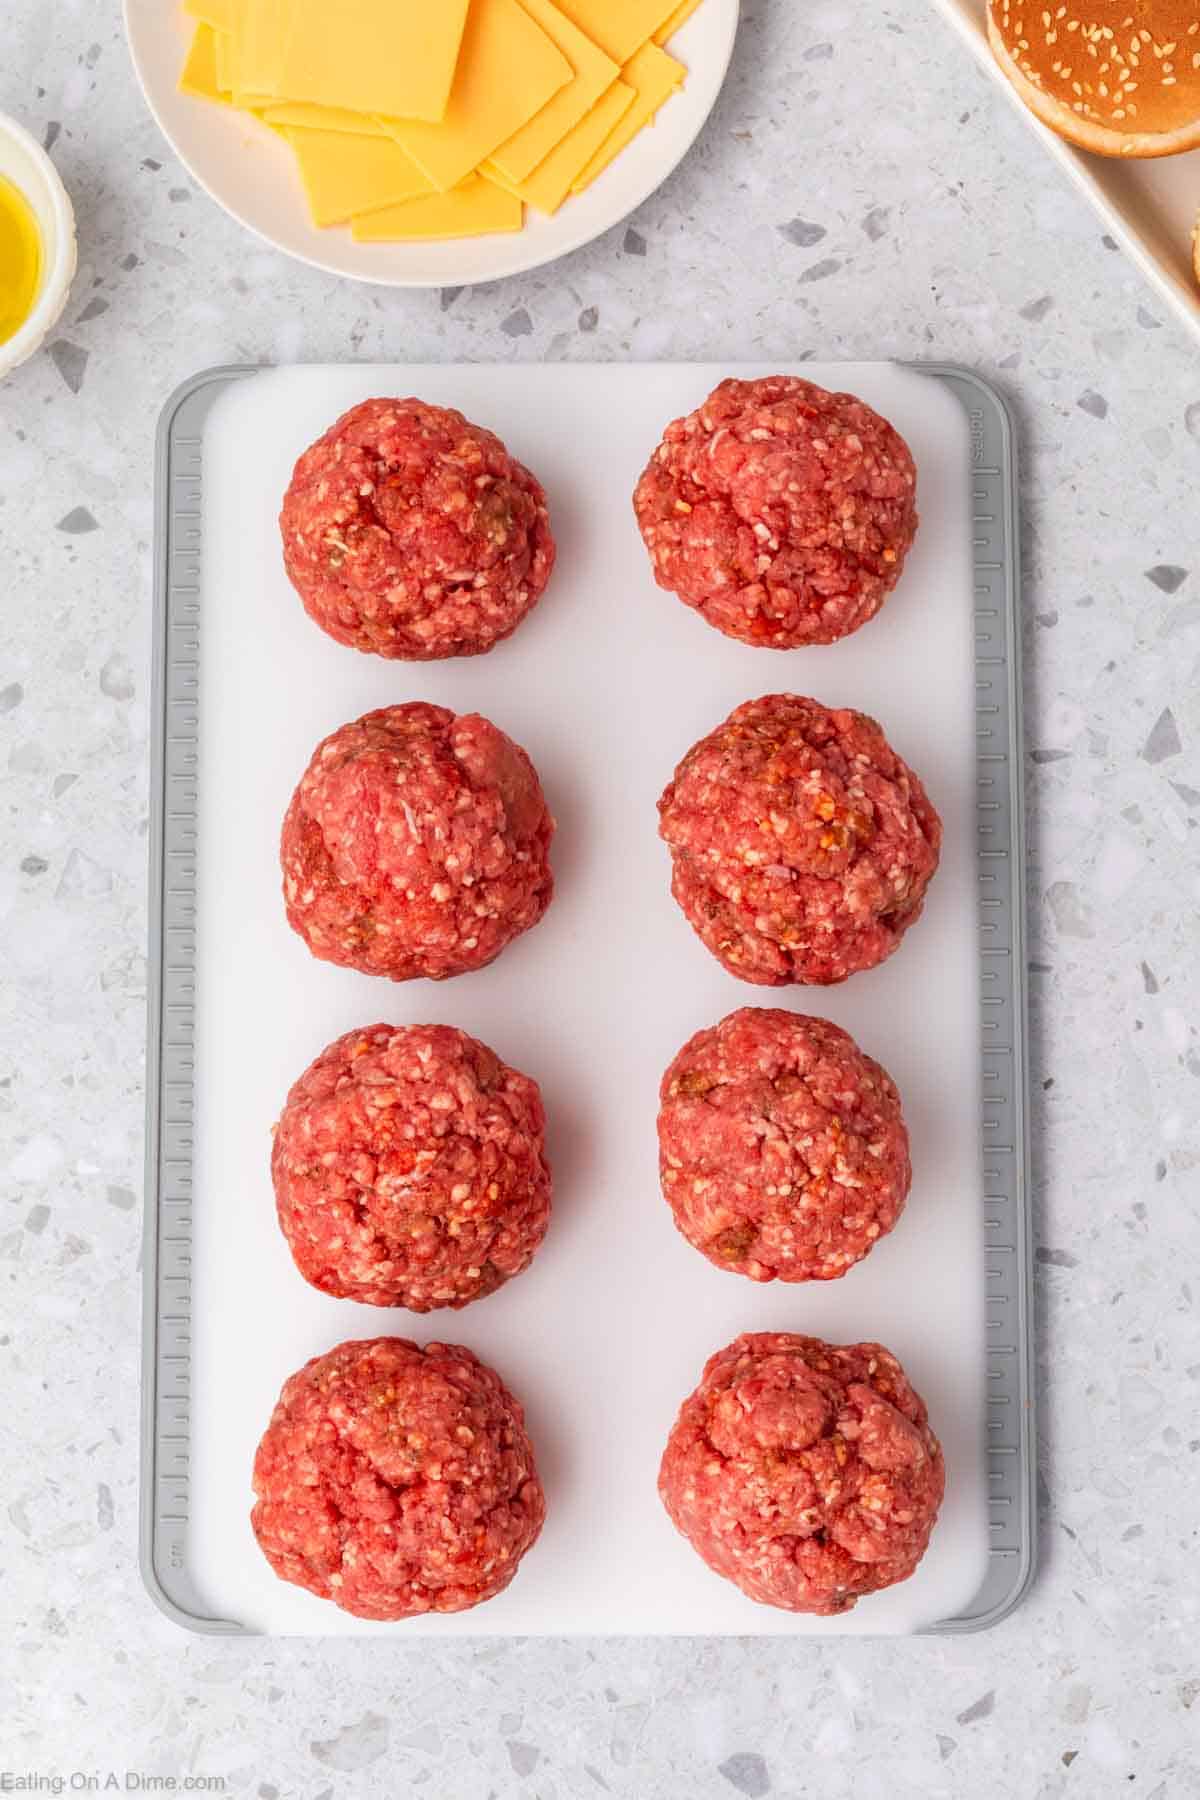 Ground beef balls on a cutting board with a plate of slice cheese on the side